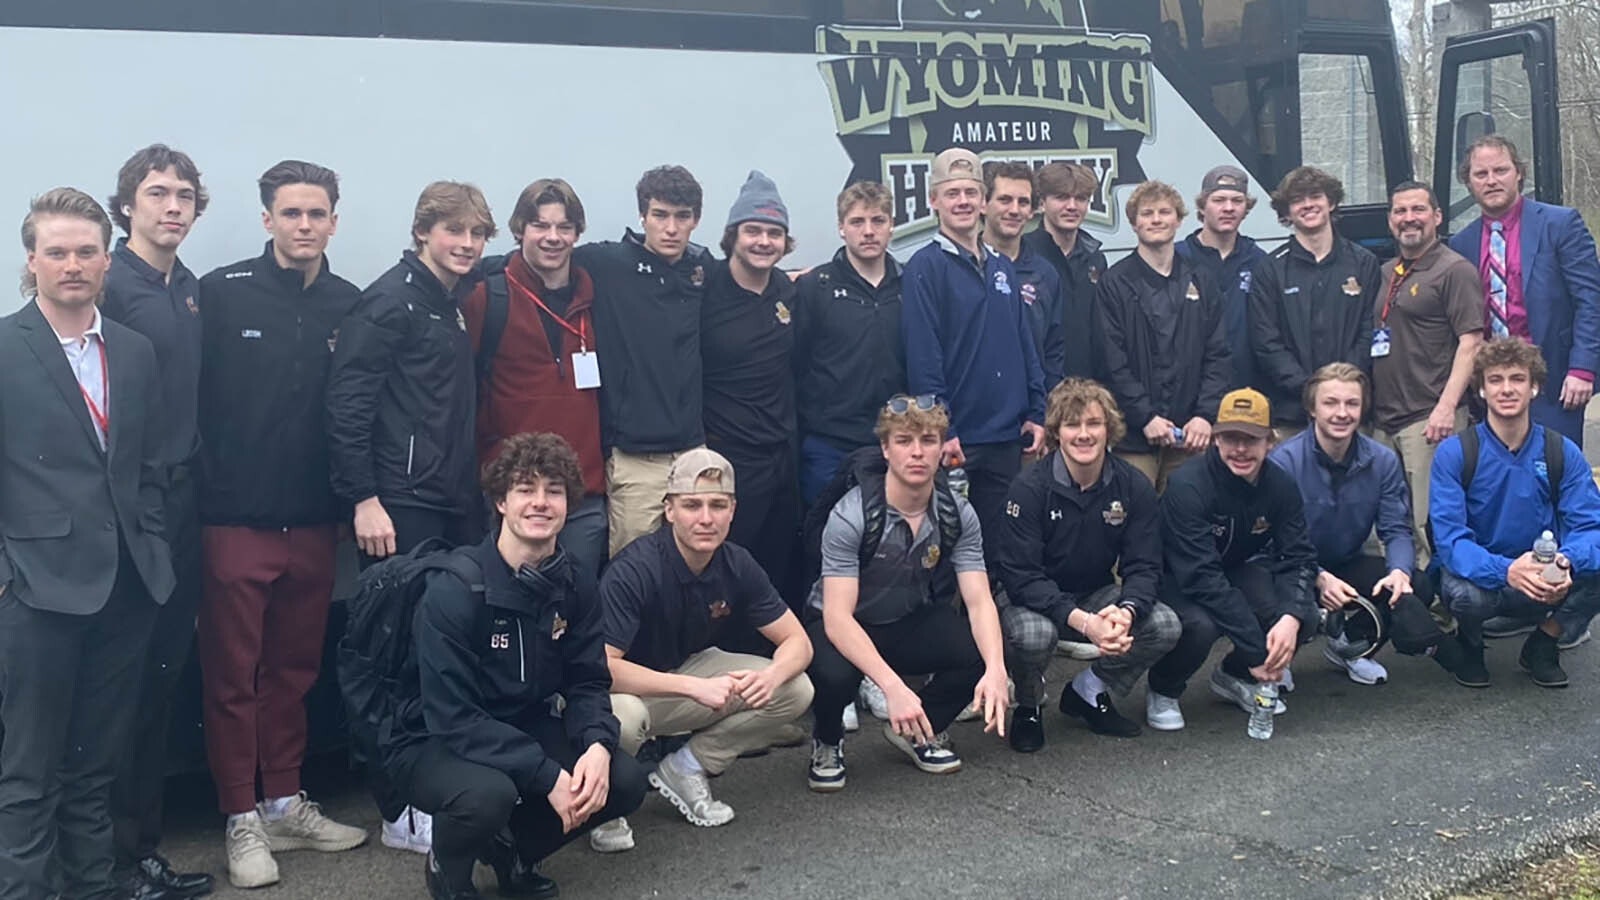 On the ride to the national championship, Team Wyoming’s Coach Laramie Davies, standing far right, said the team further bonded and took time to see a professional hockey game in Saint Louis.